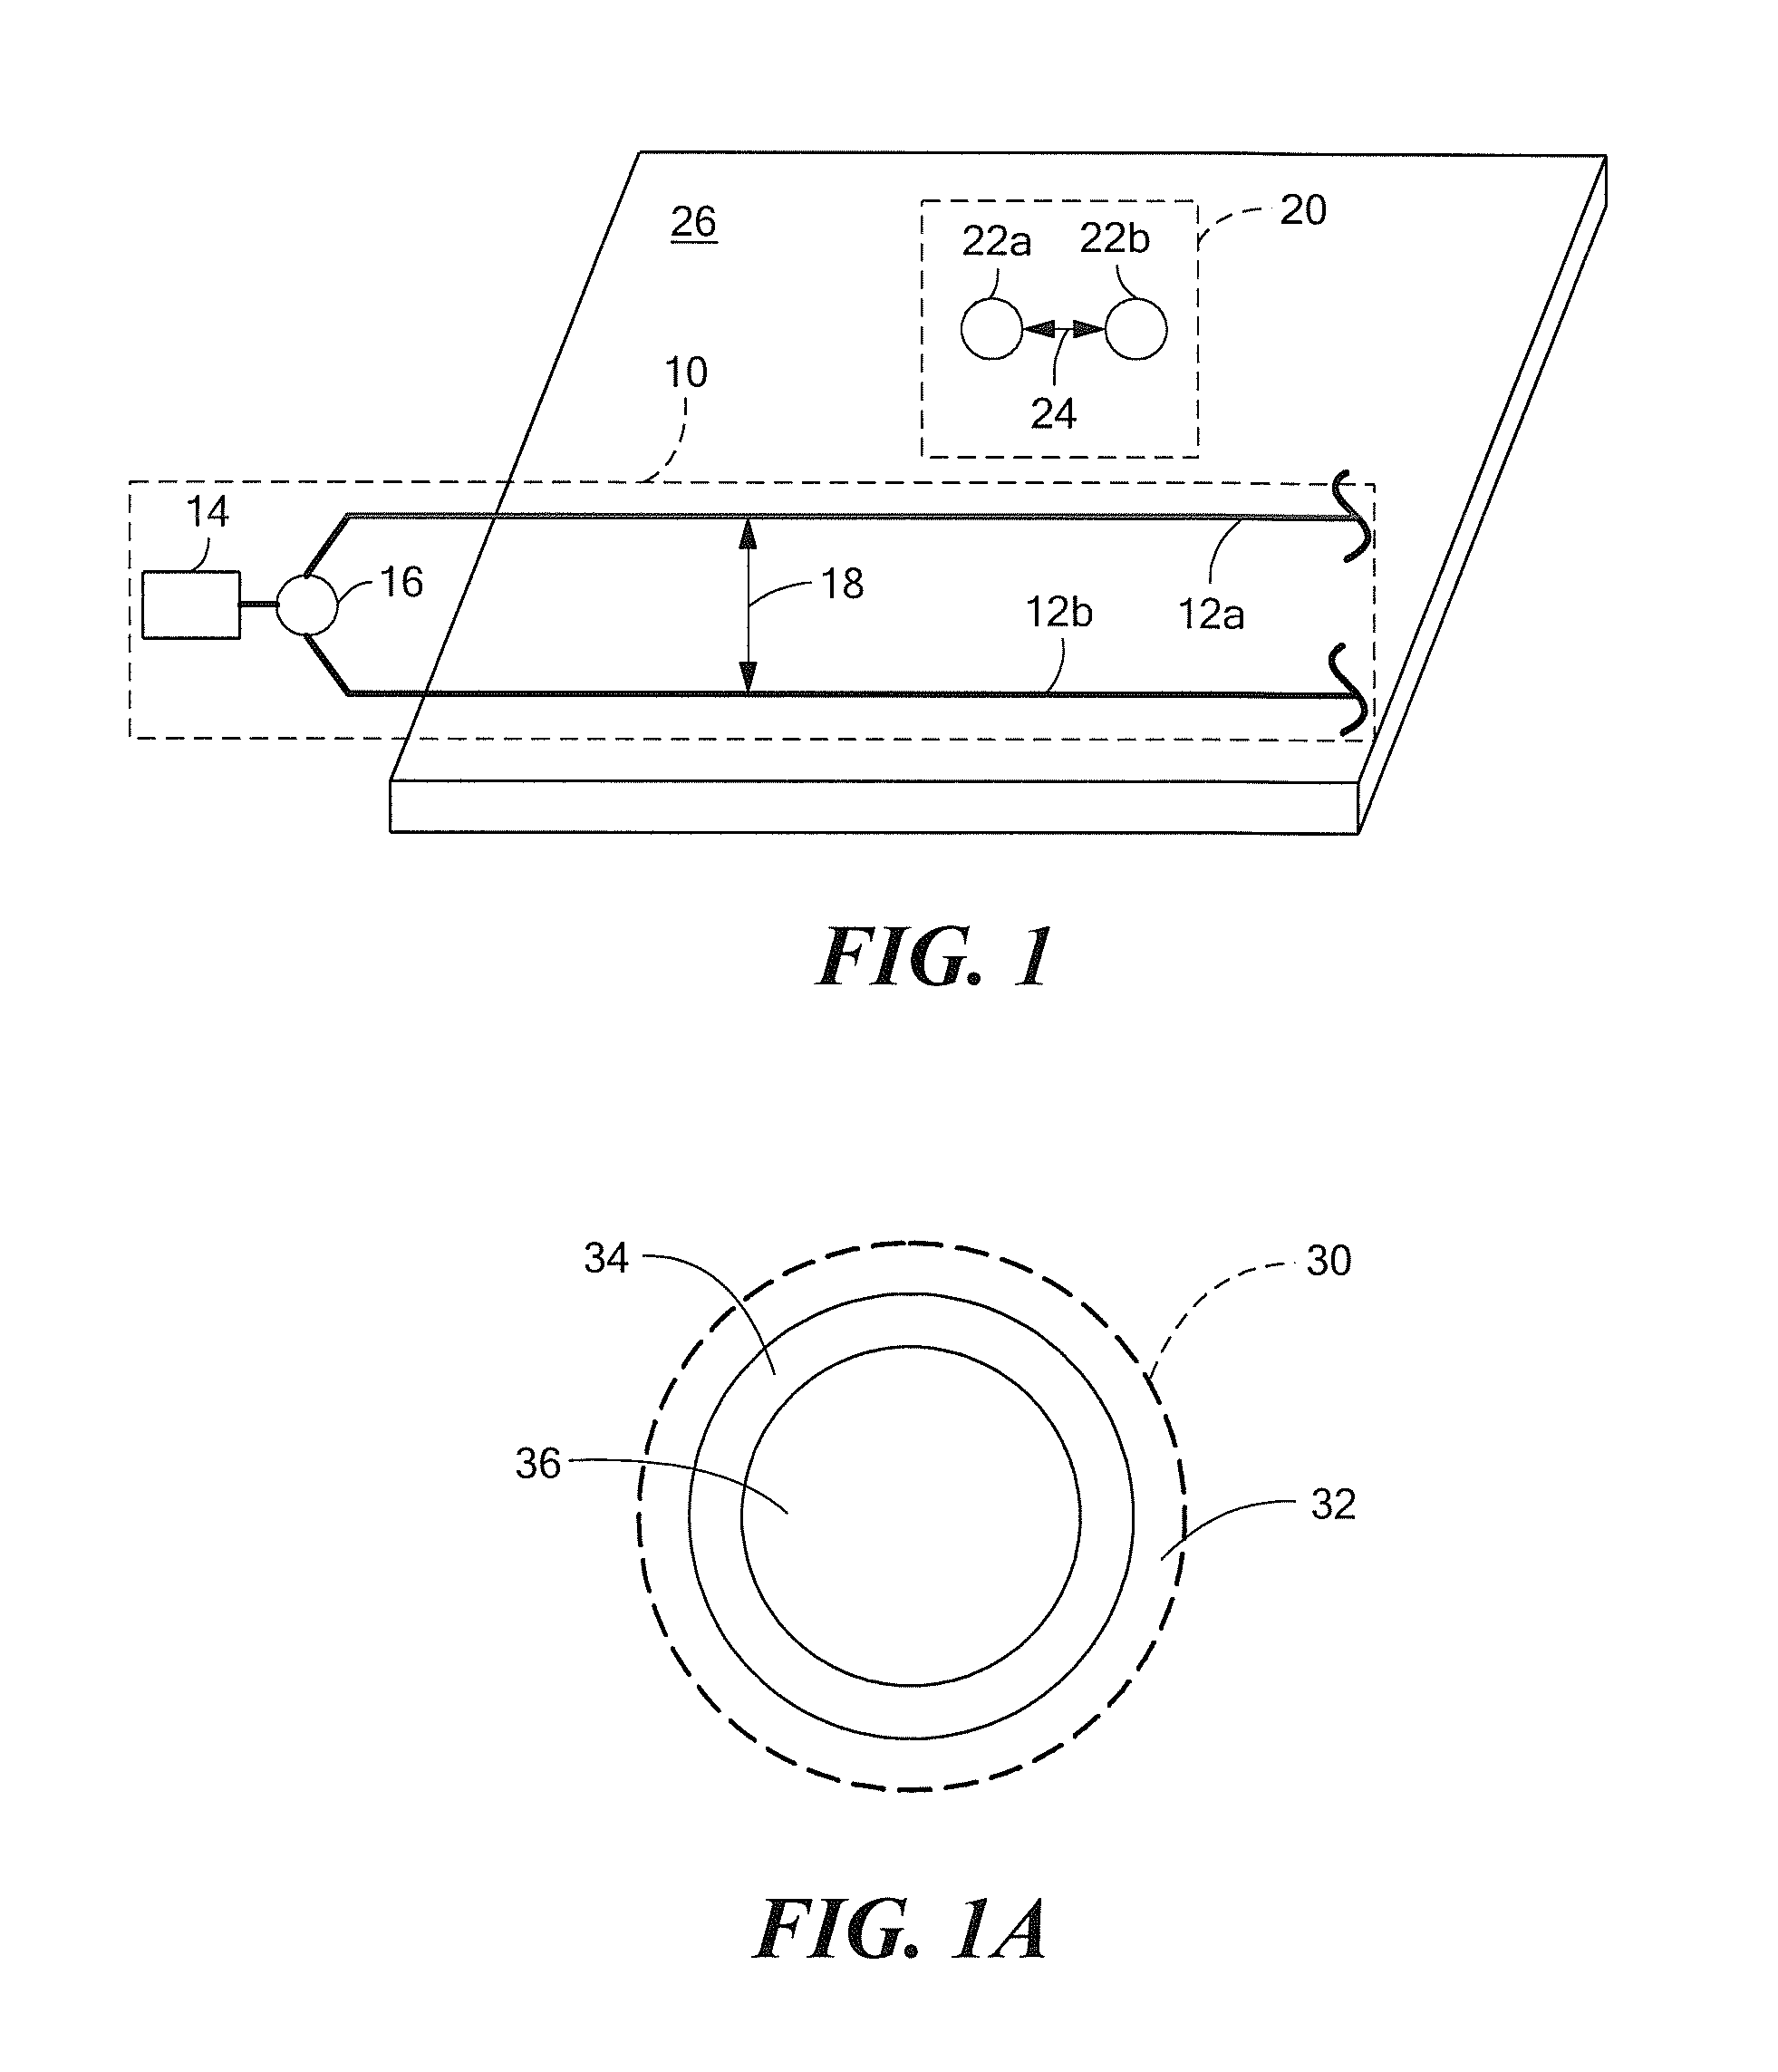 Method and apparatus for Anti-biofouling of a protected surface in liquid environments